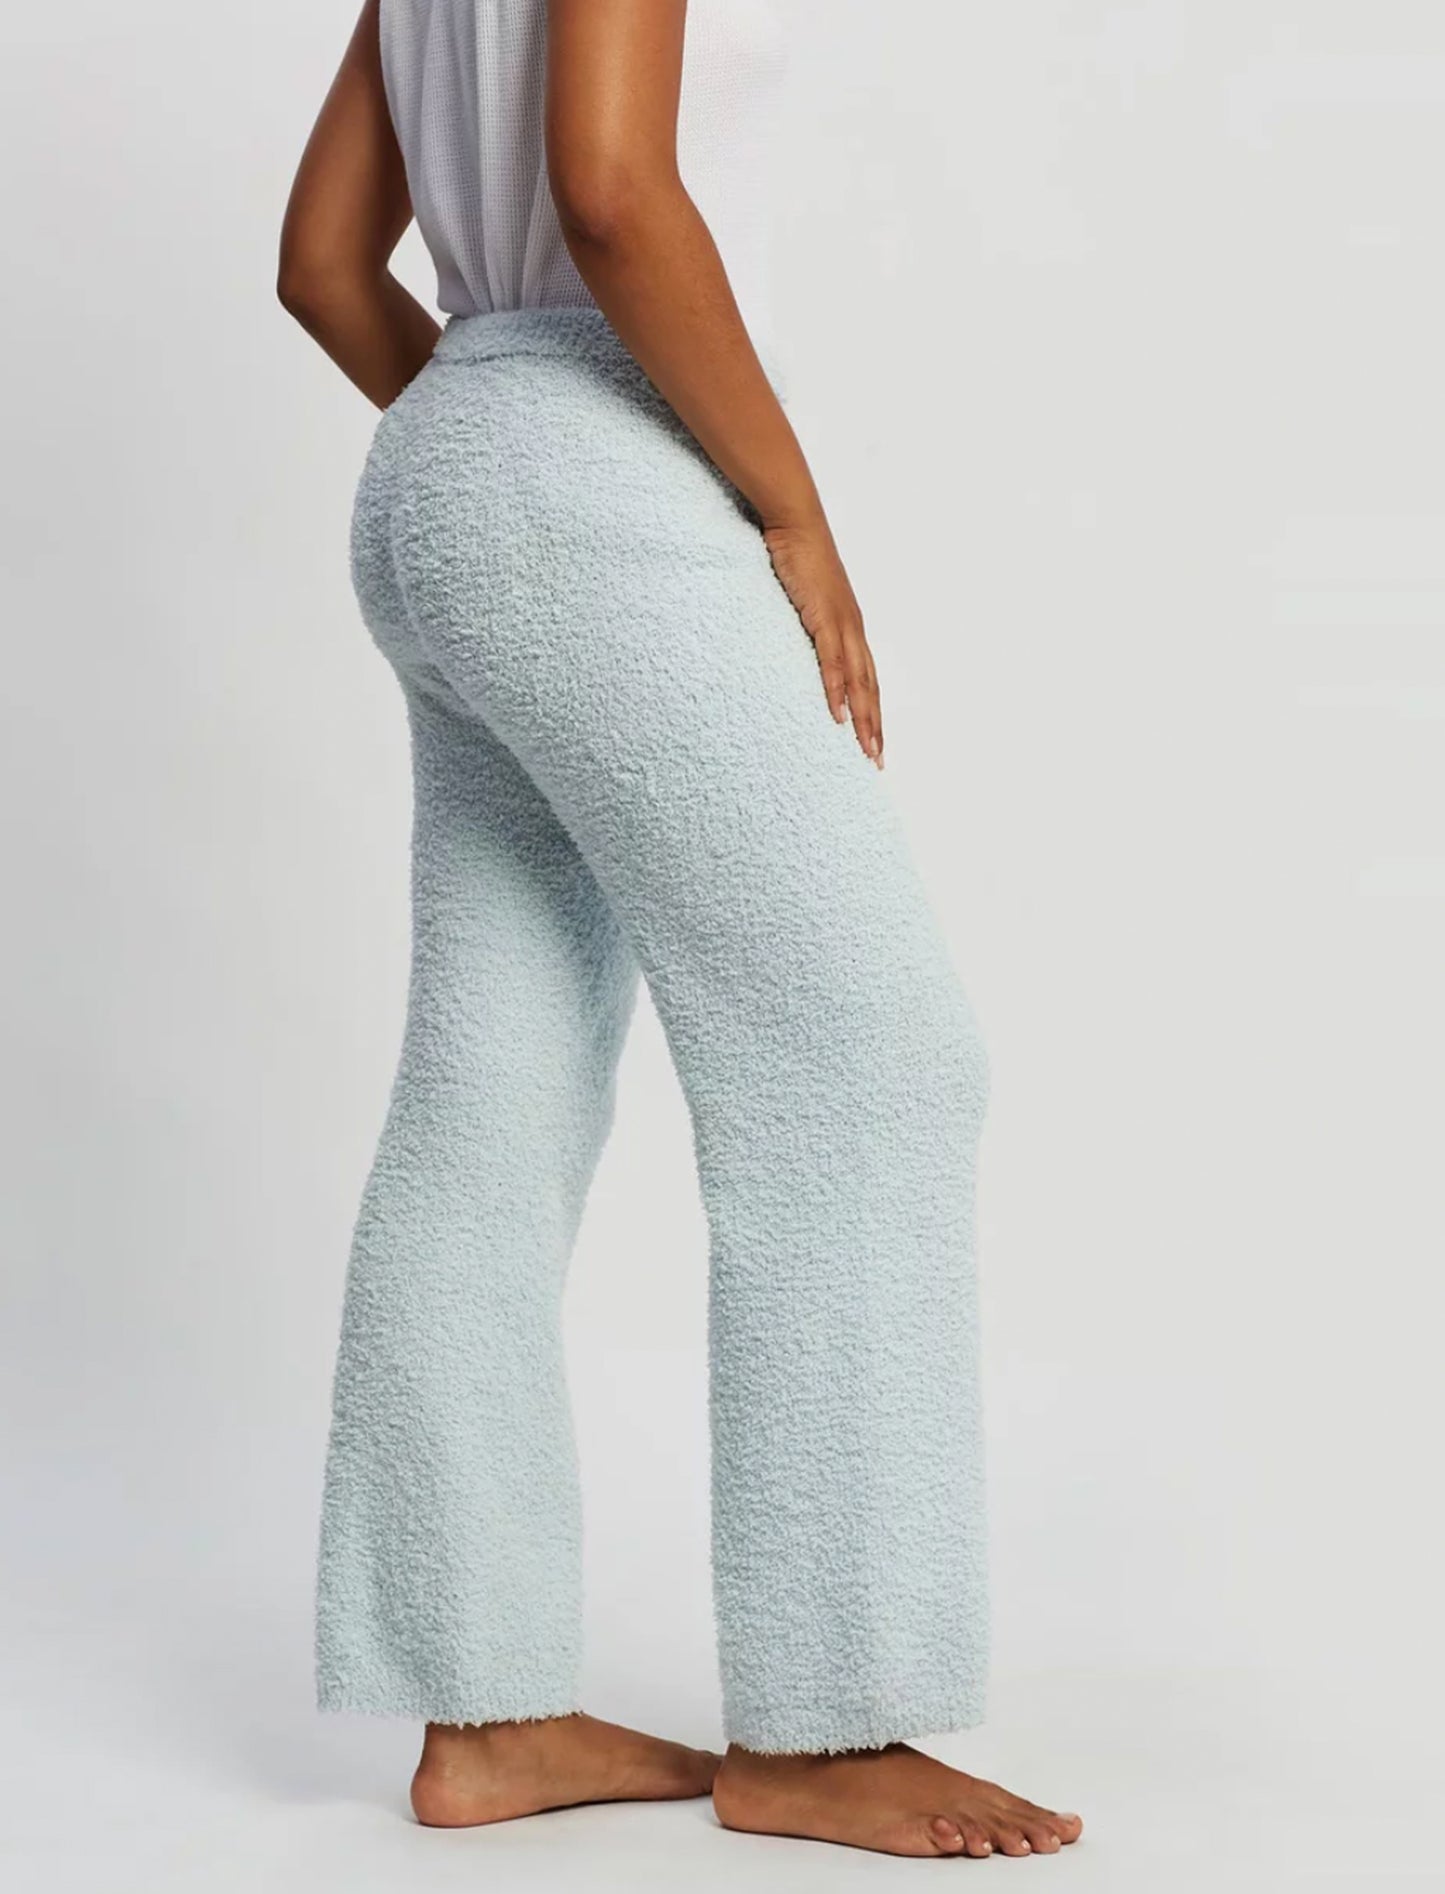 Cozy Knit Pant in Powder Blue